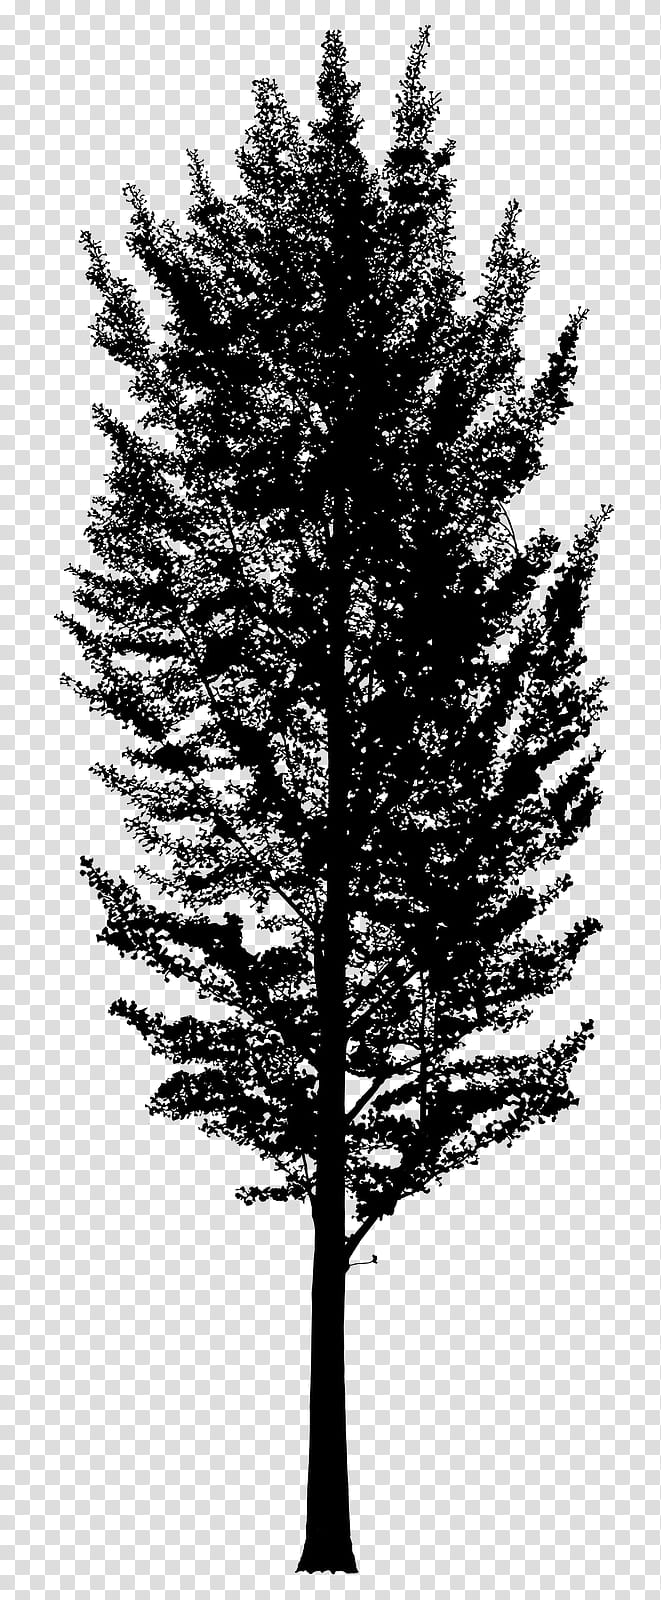 Christmas Black And White, As You Like It, Black White M, Christmas Tree, Larch, Theatre, Comedy, 2018 transparent background PNG clipart